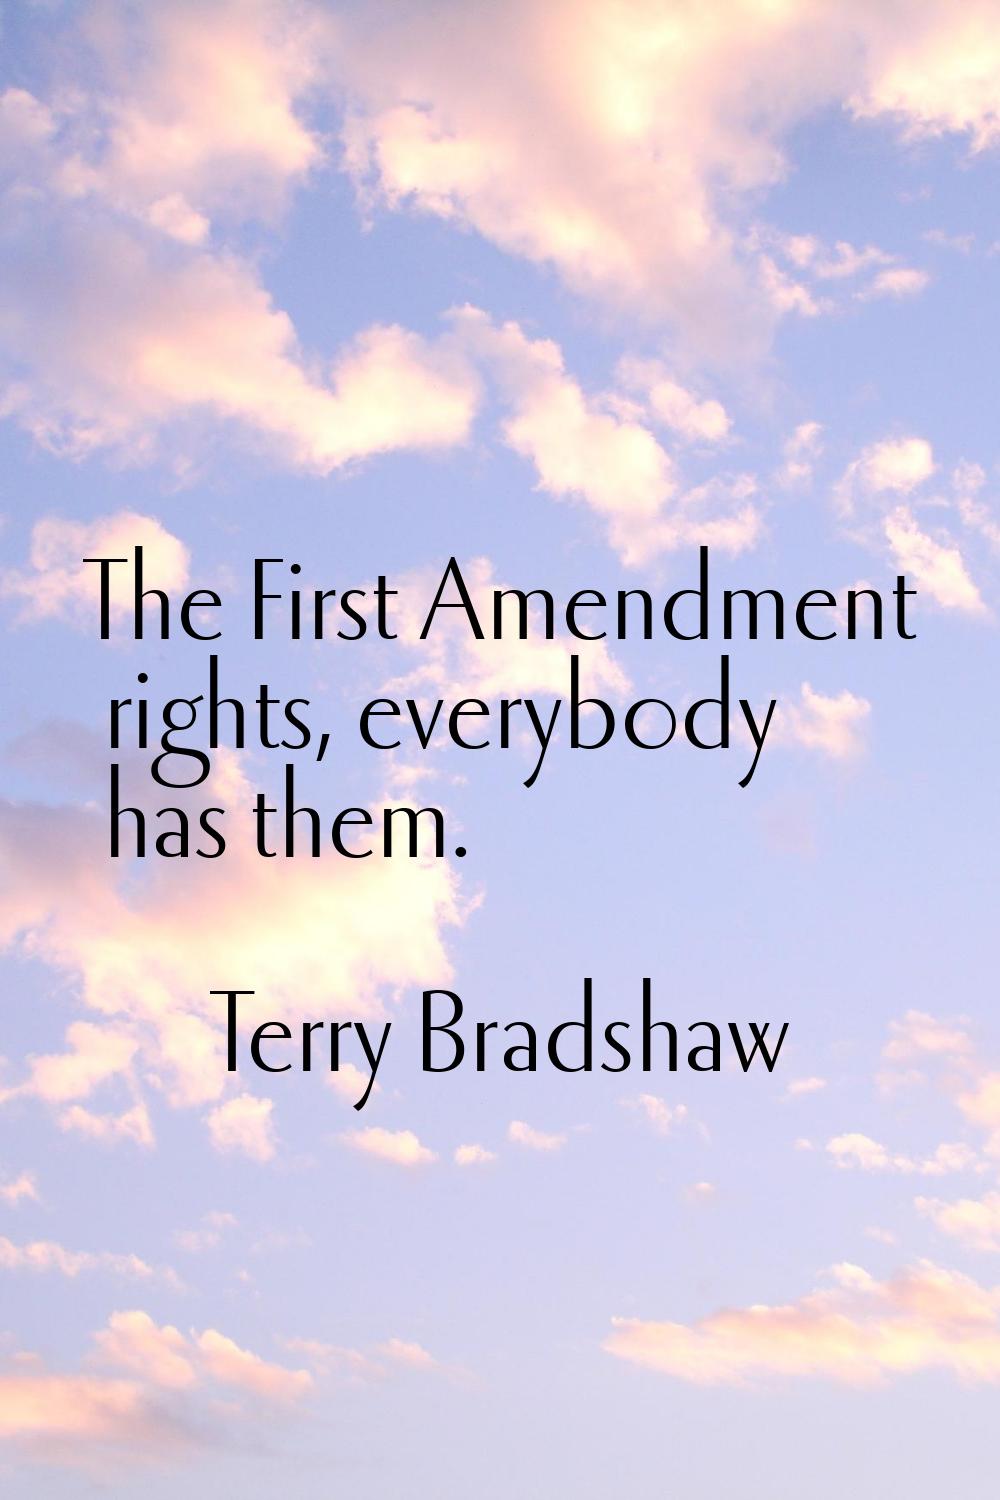 The First Amendment rights, everybody has them.